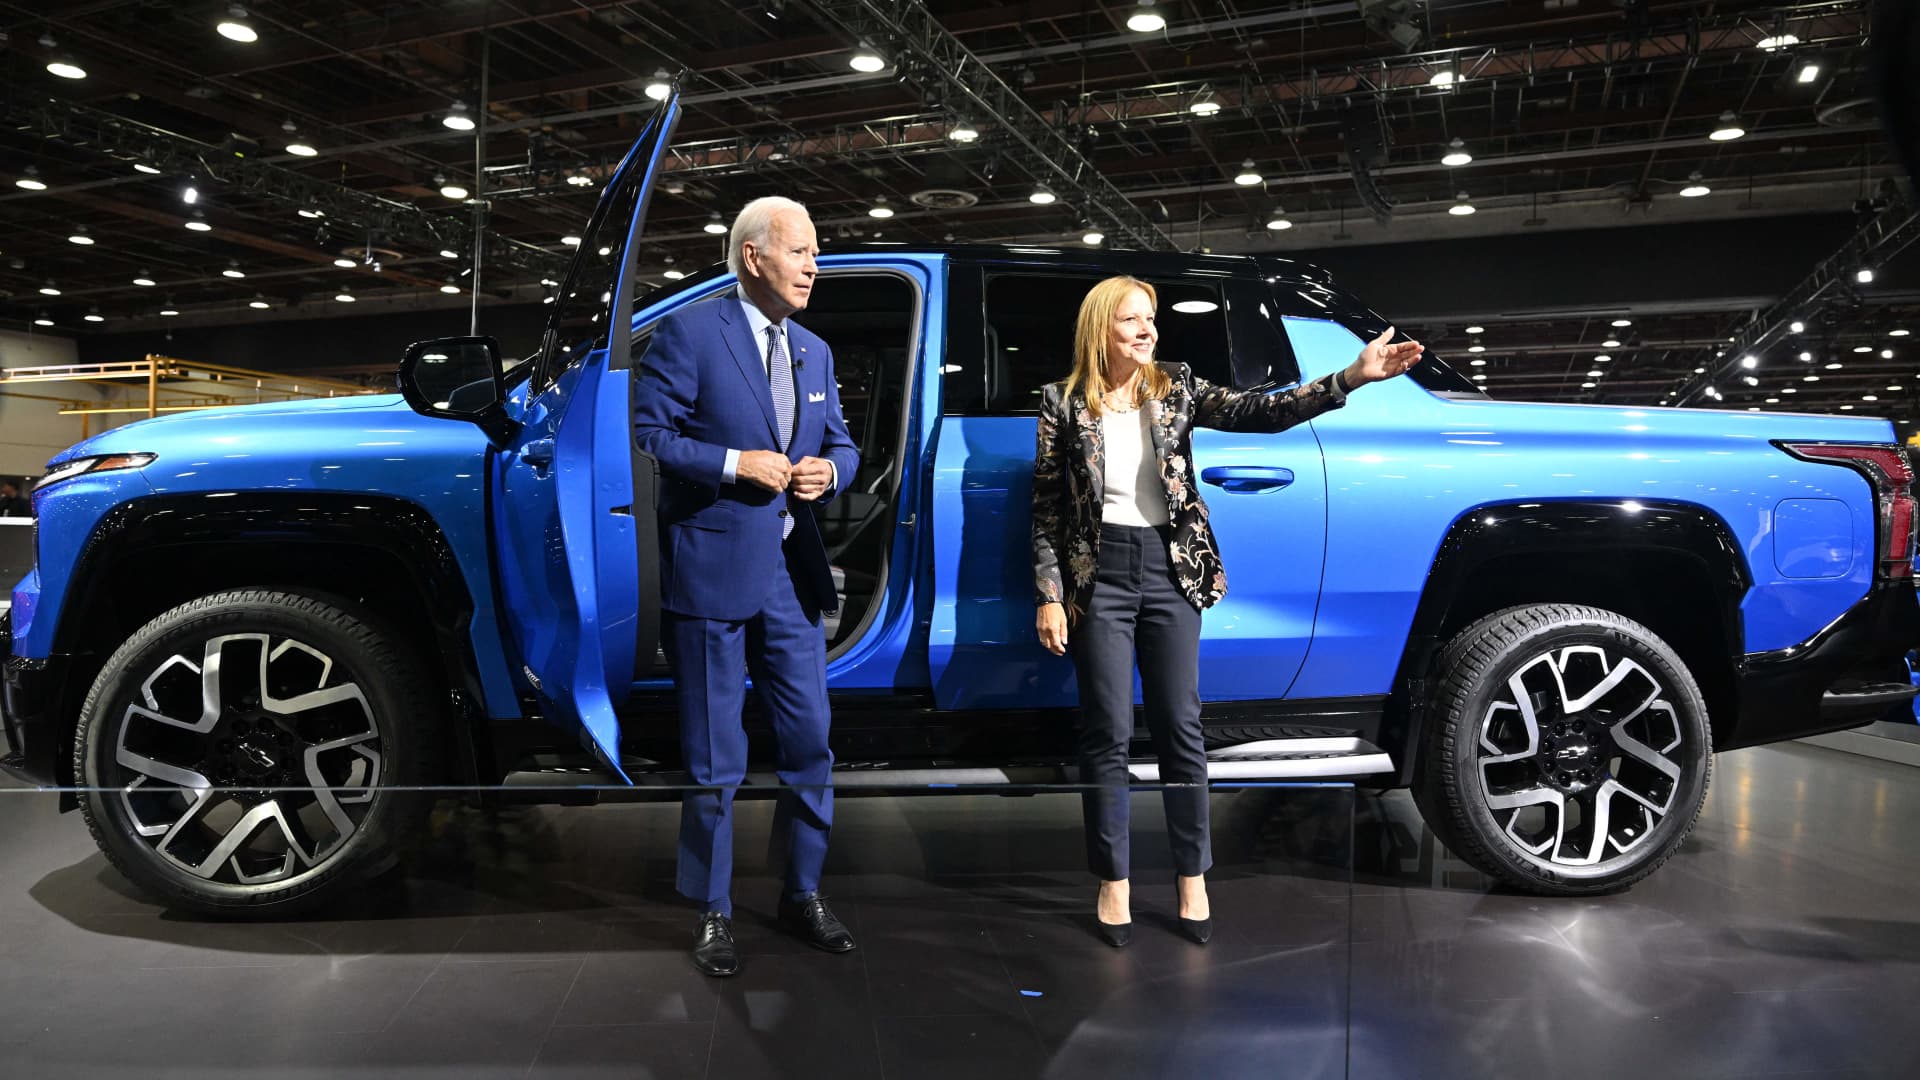 President Joe Biden, with General Motors CEO Mary Barra, looks at a Chevrolet Silverado electric vehicle as he tours the 2022 North American International Auto Show at Huntington Place Convention Center in Detroit, Michigan, on Sept. 14, 2022. Biden is visiting the auto show to highlight electric vehicle manufacturing.